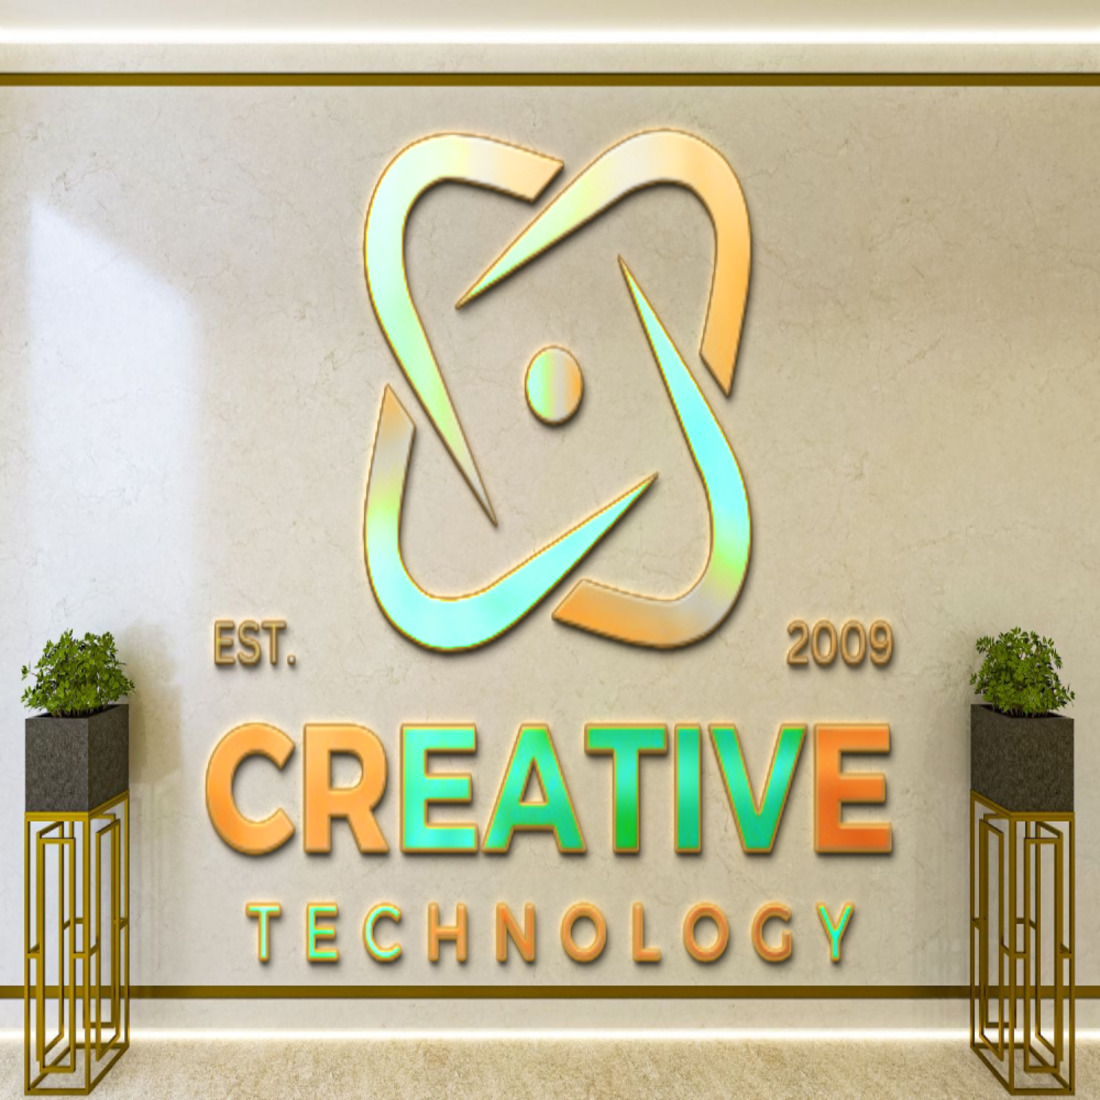 3D logo of creative technology cover image.